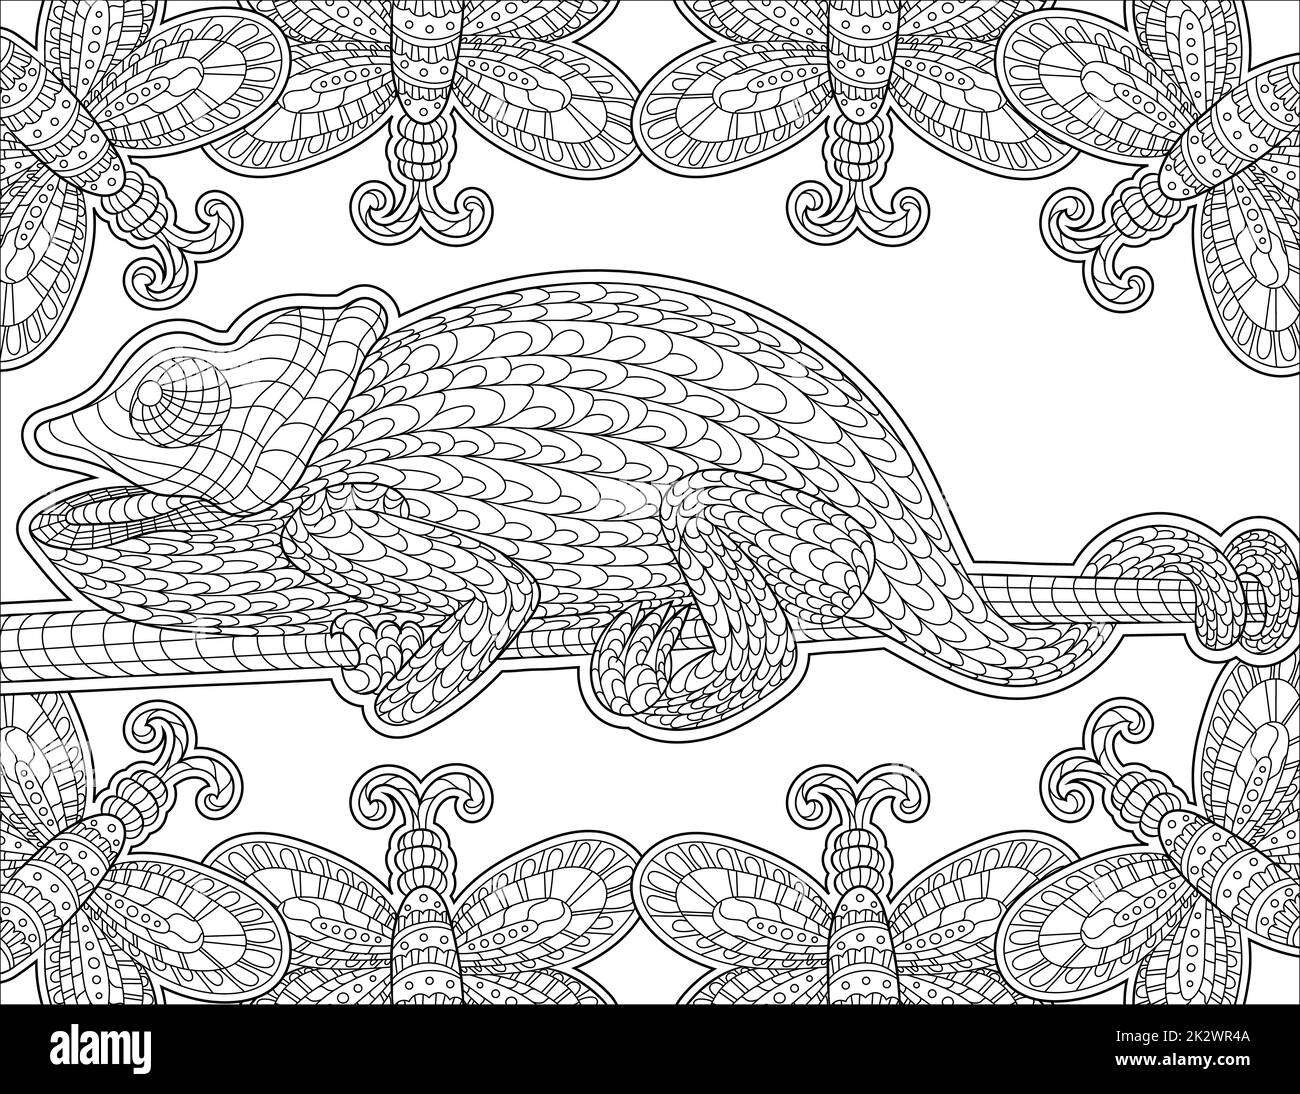 Chameleon Line Drawing Surreounded With Butterfly Frame For Detailed Colouring Book Stock Photo